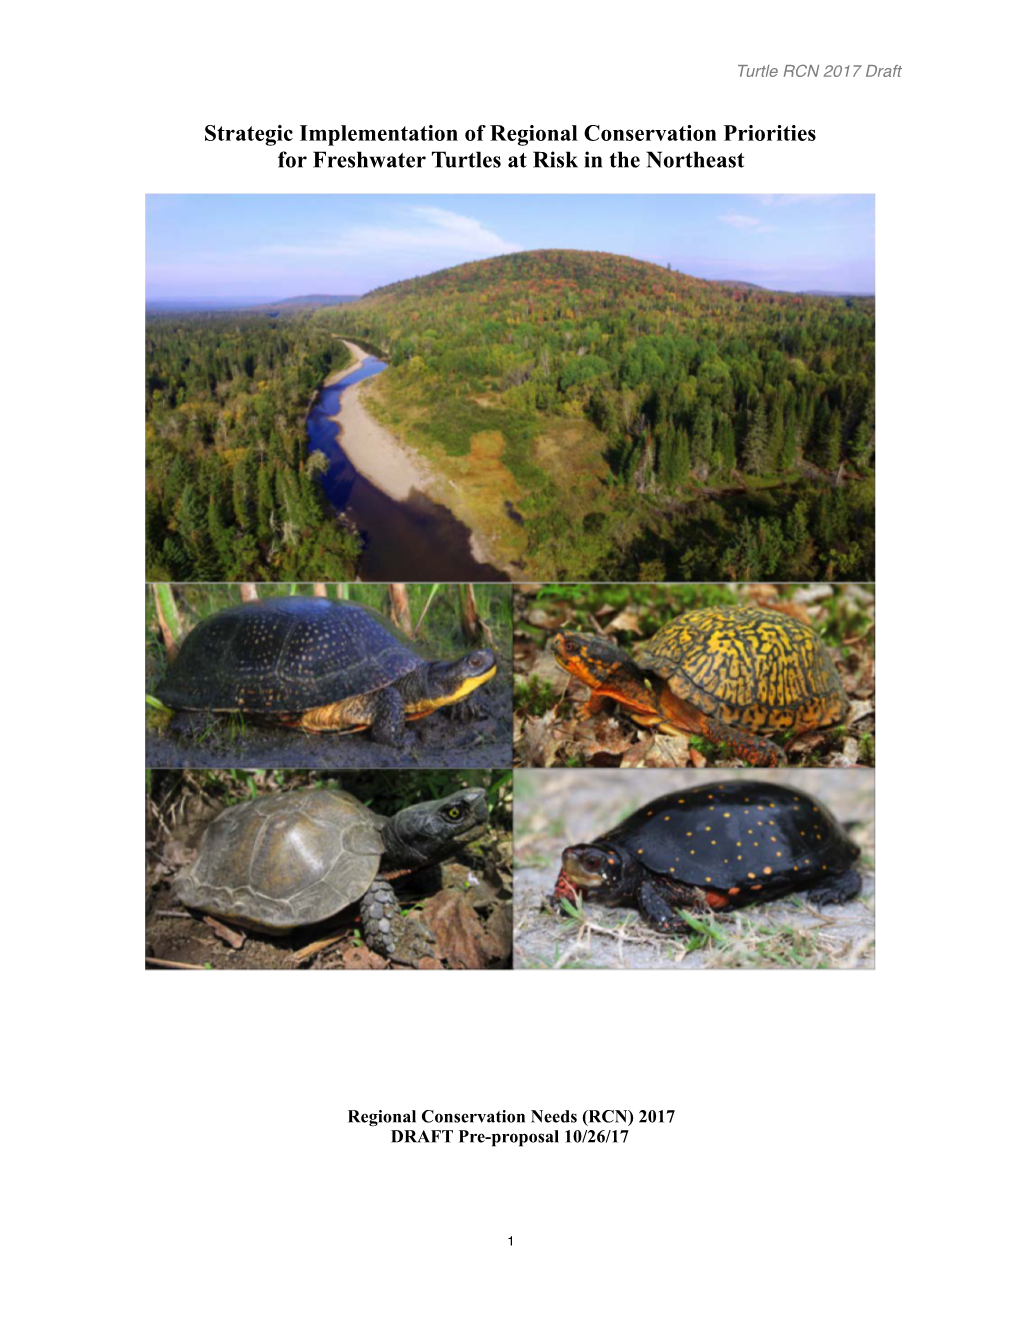 Strategic Implementation of Regional Conservation Priorities for Freshwater Turtles at Risk in the Northeast